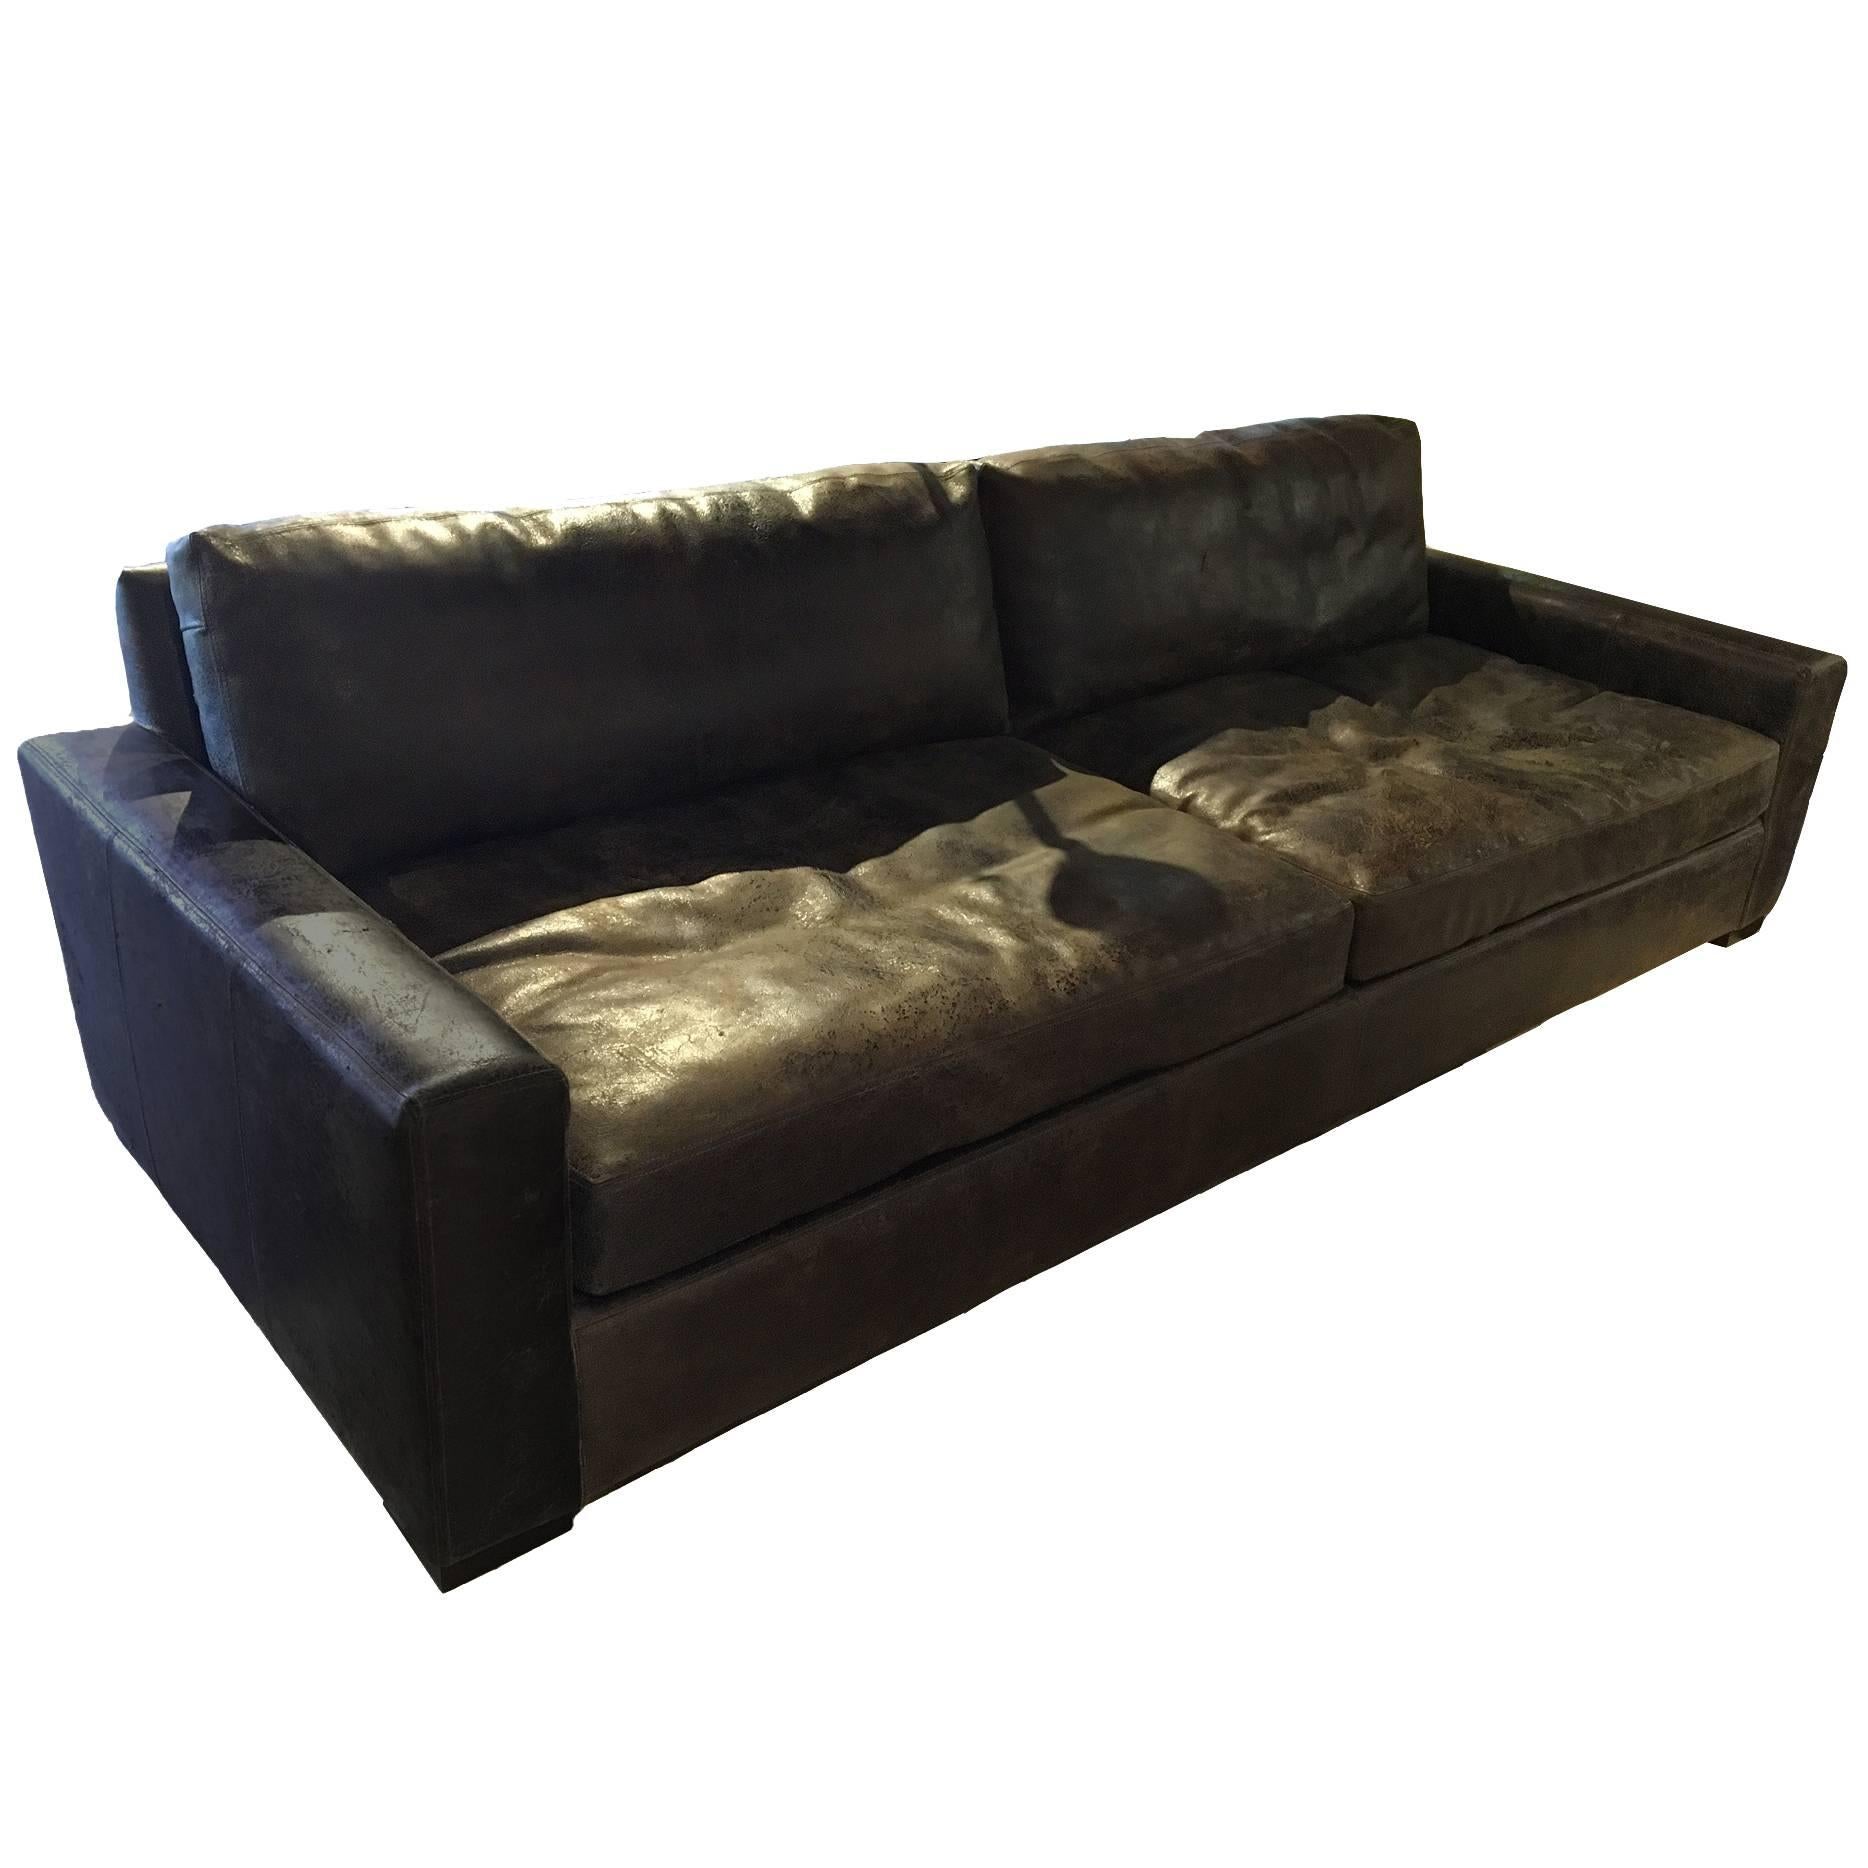 Oversized Distressed Leather Sofa For Sale